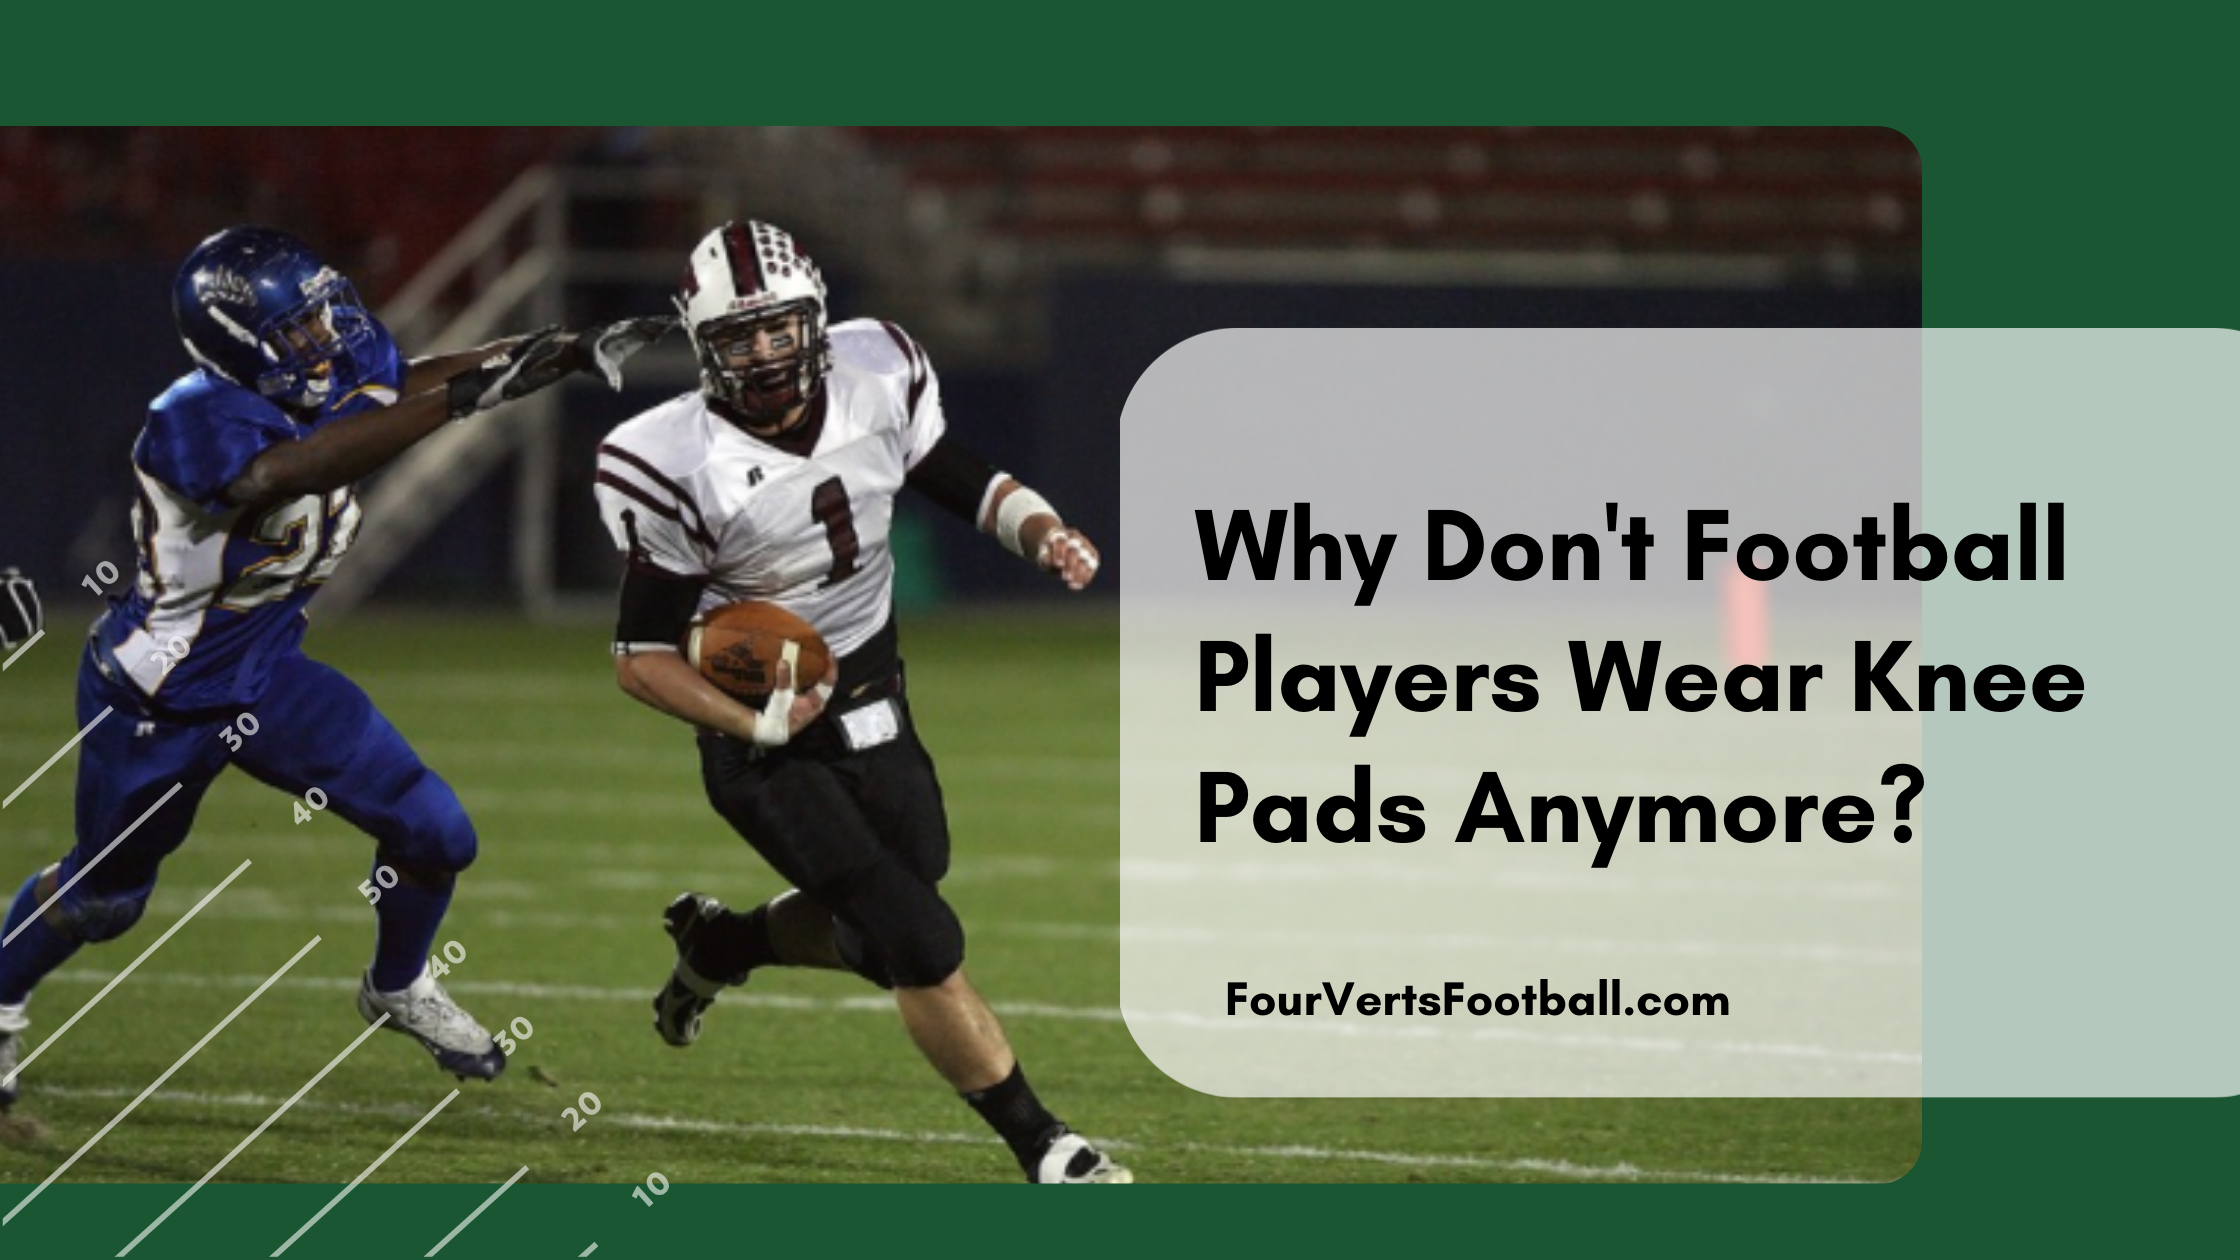 Why Don't Football Players Wear Knee Pads Anymore?